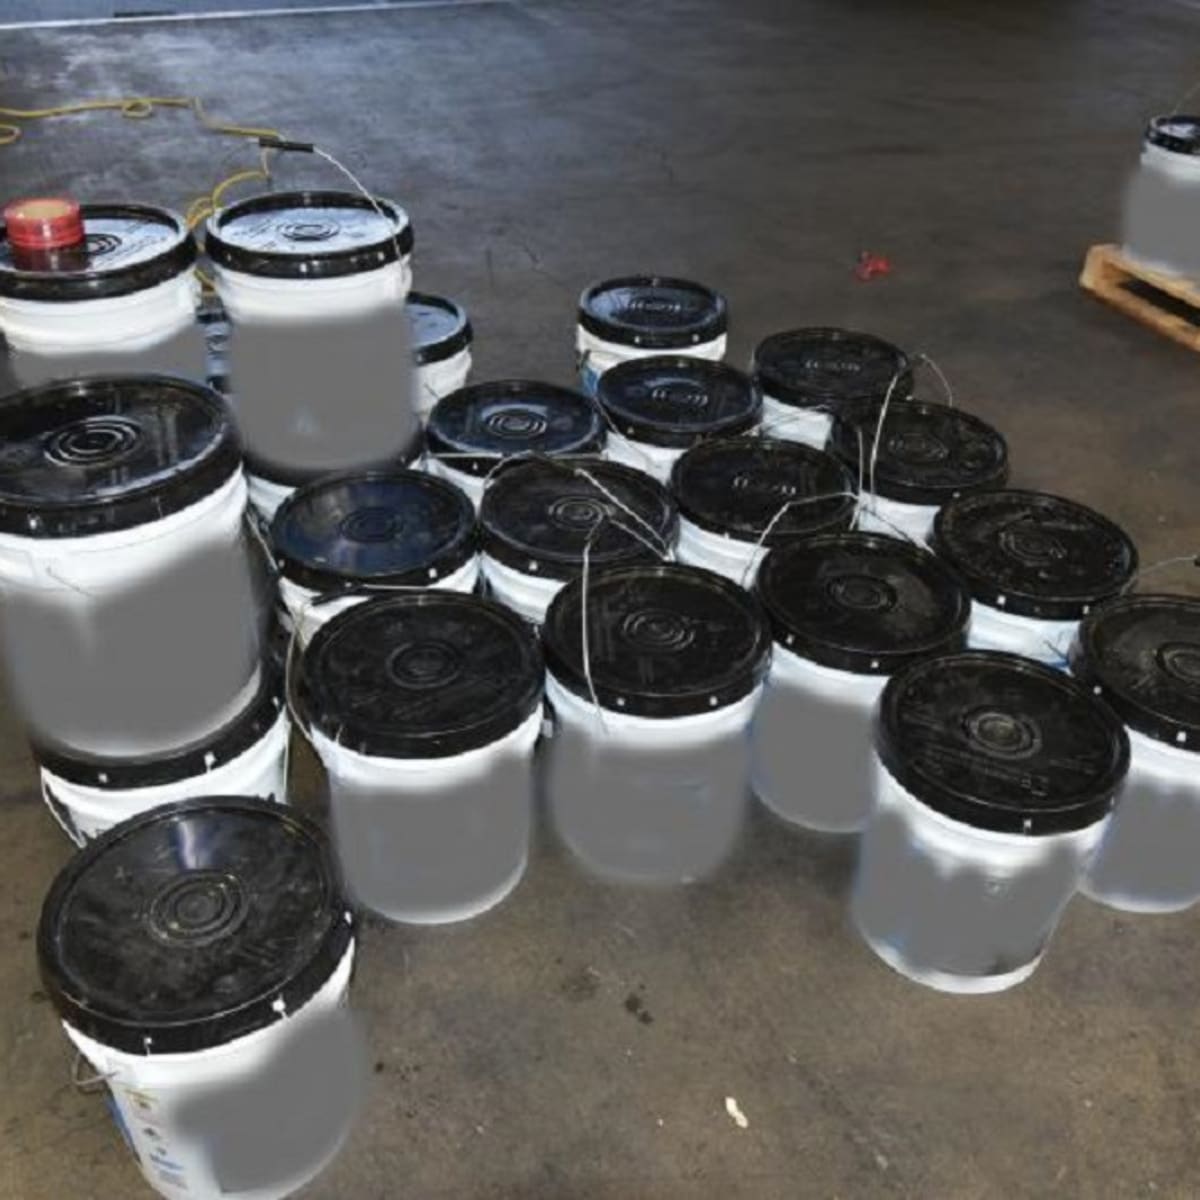 Customs officials seize 140 pounds of meth hidden in paint